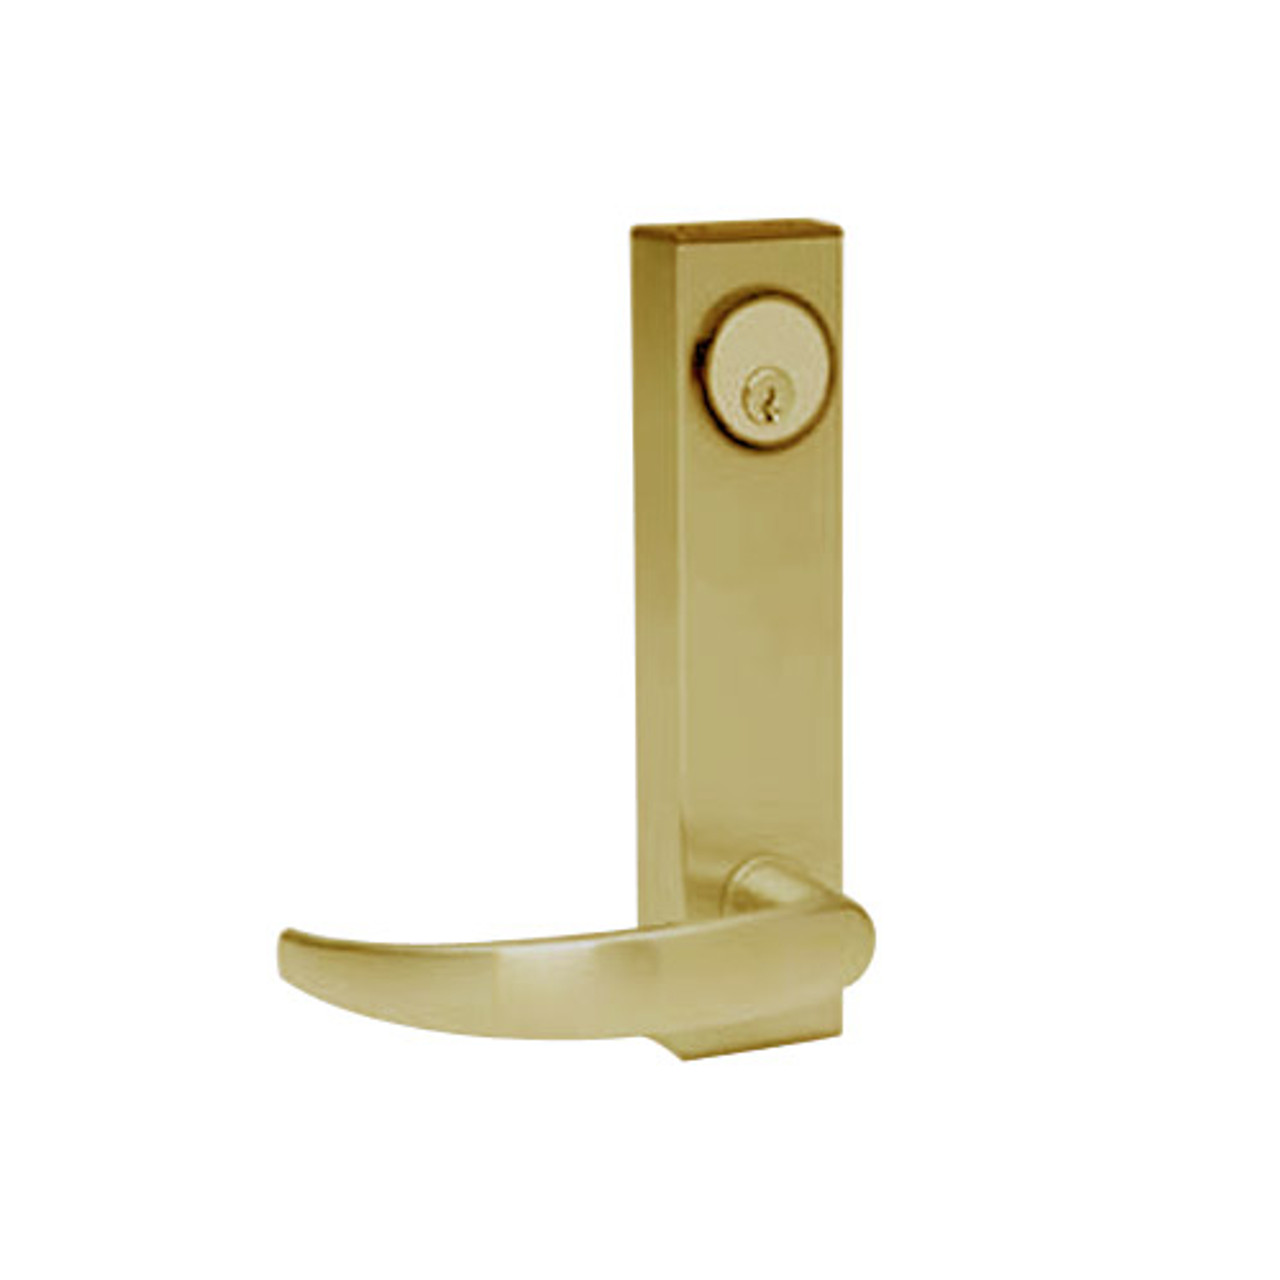 3080E-01-0-96-30 US4 Adams Rite Electrified Entry Trim with Curve Lever in Satin Brass Finish